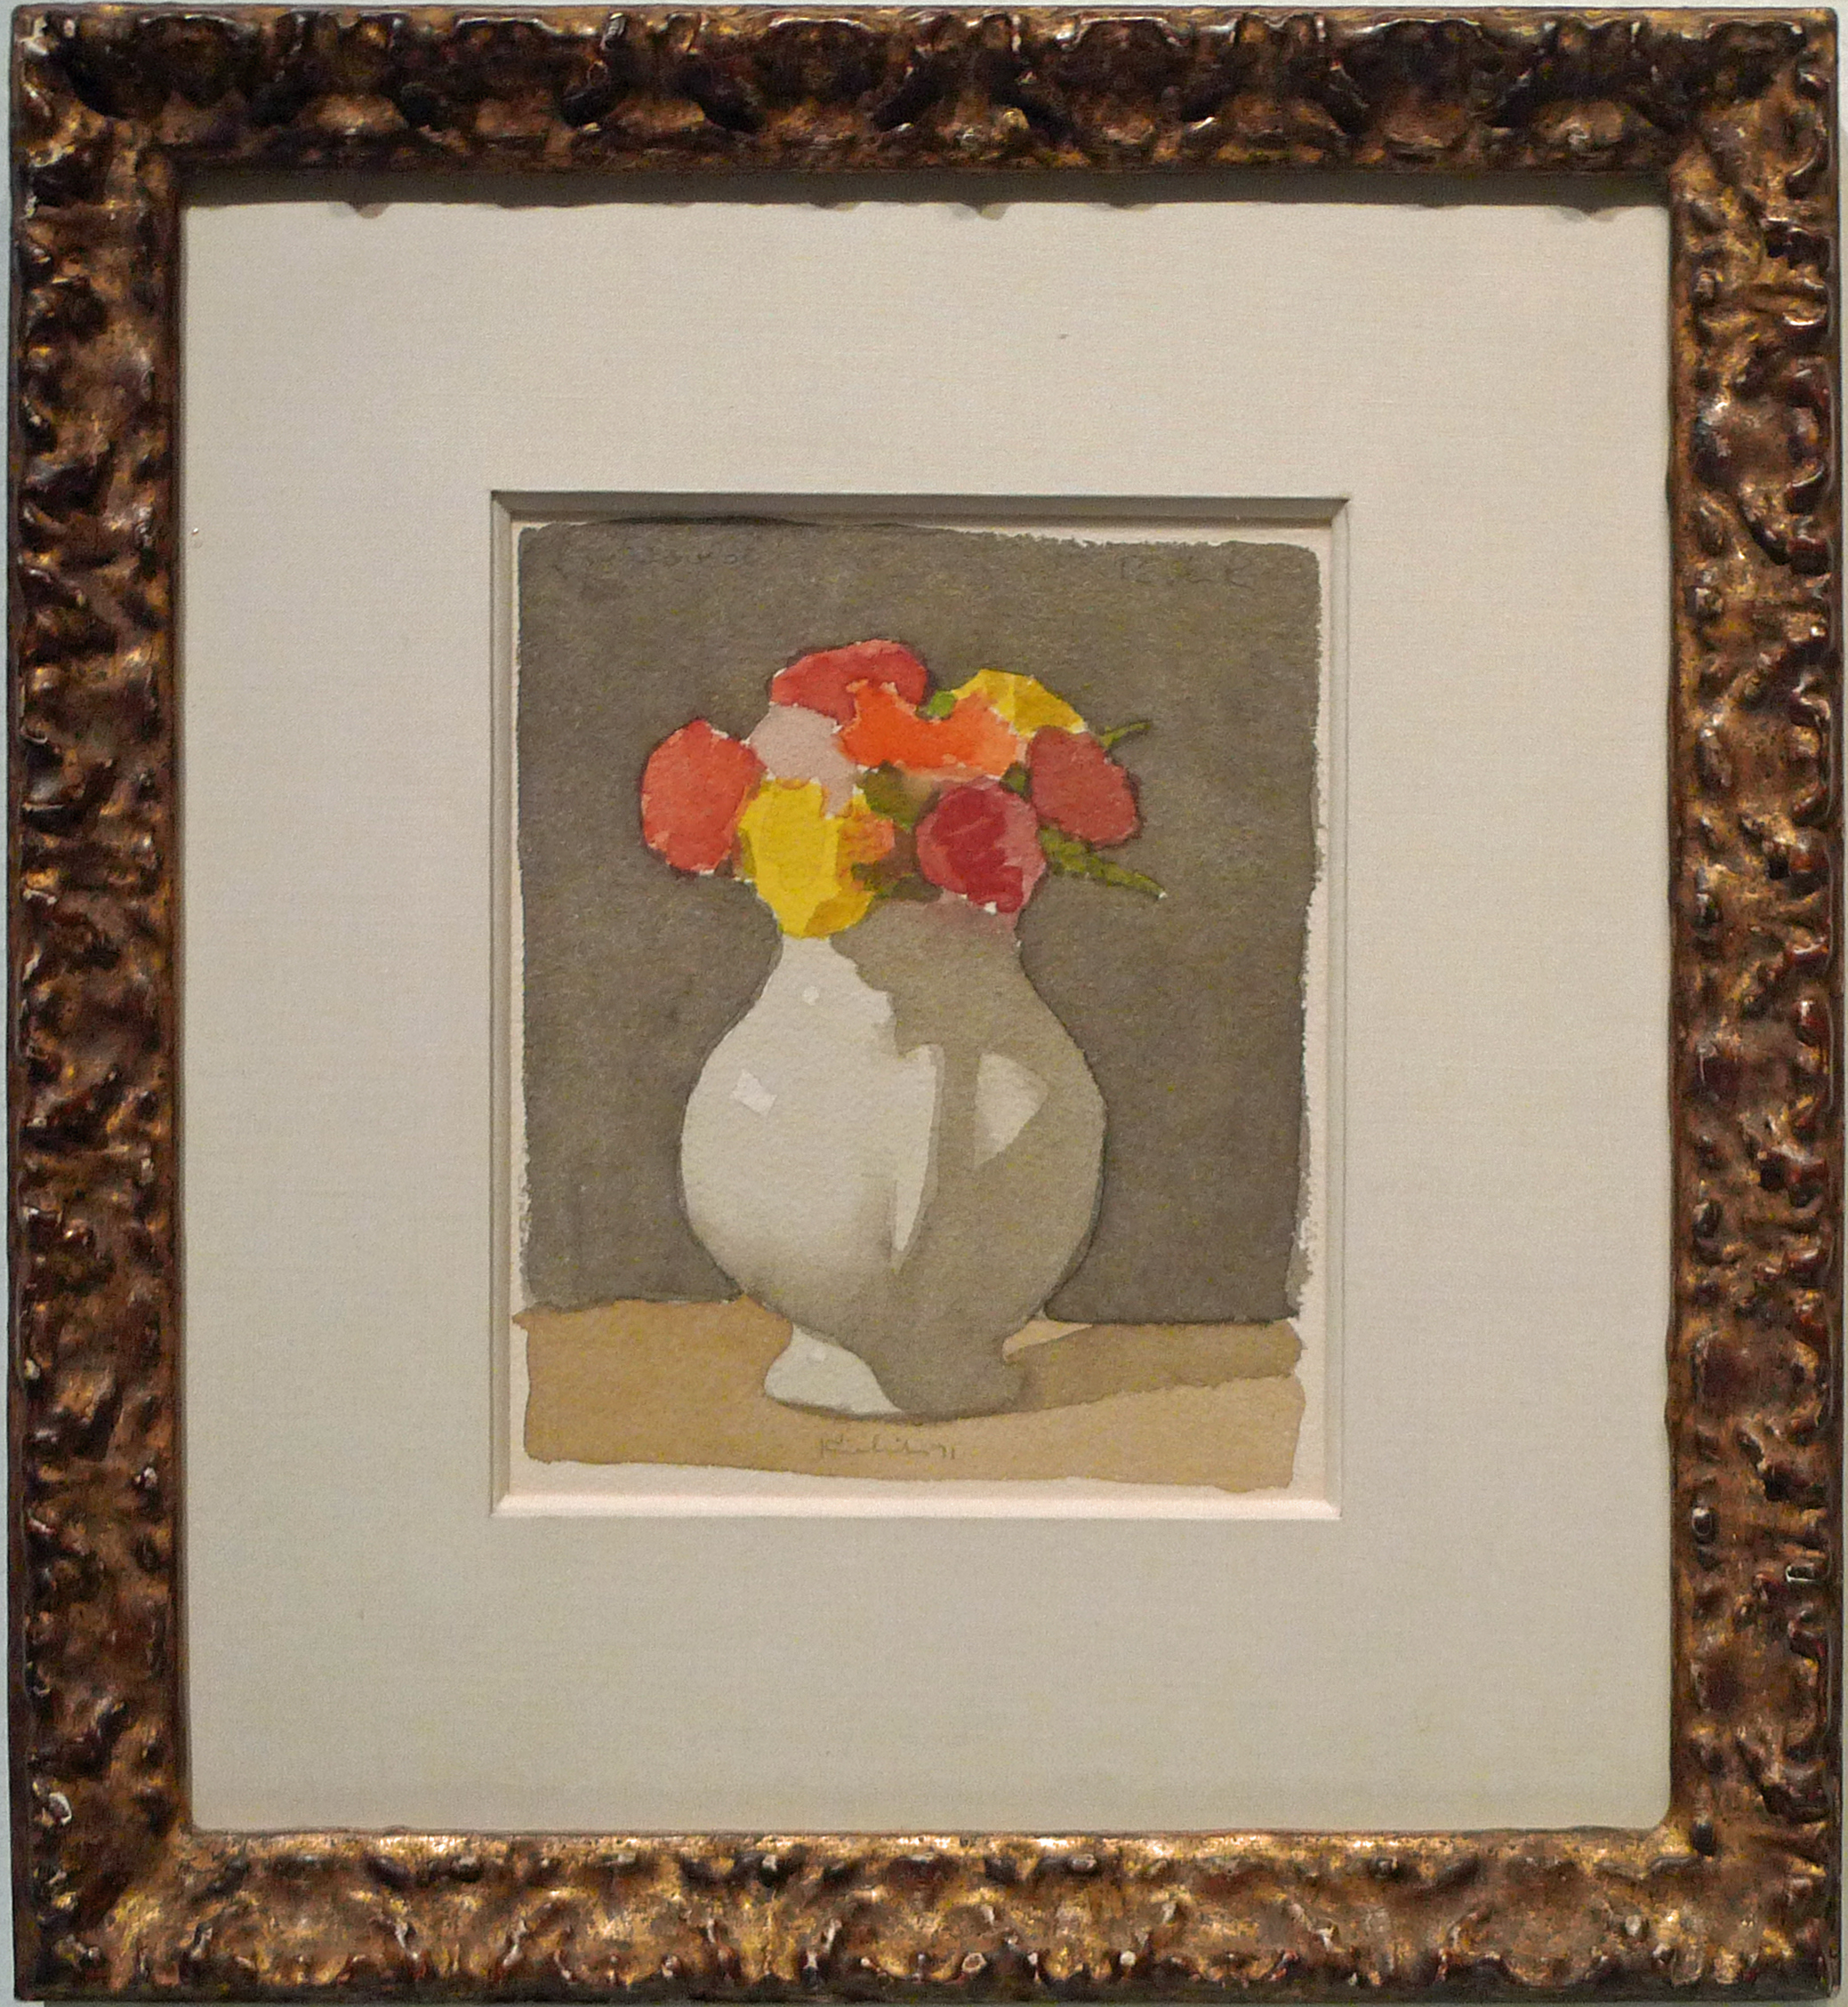 Boquet of red, orange, and yellow flowers in white vase on table in gold frame